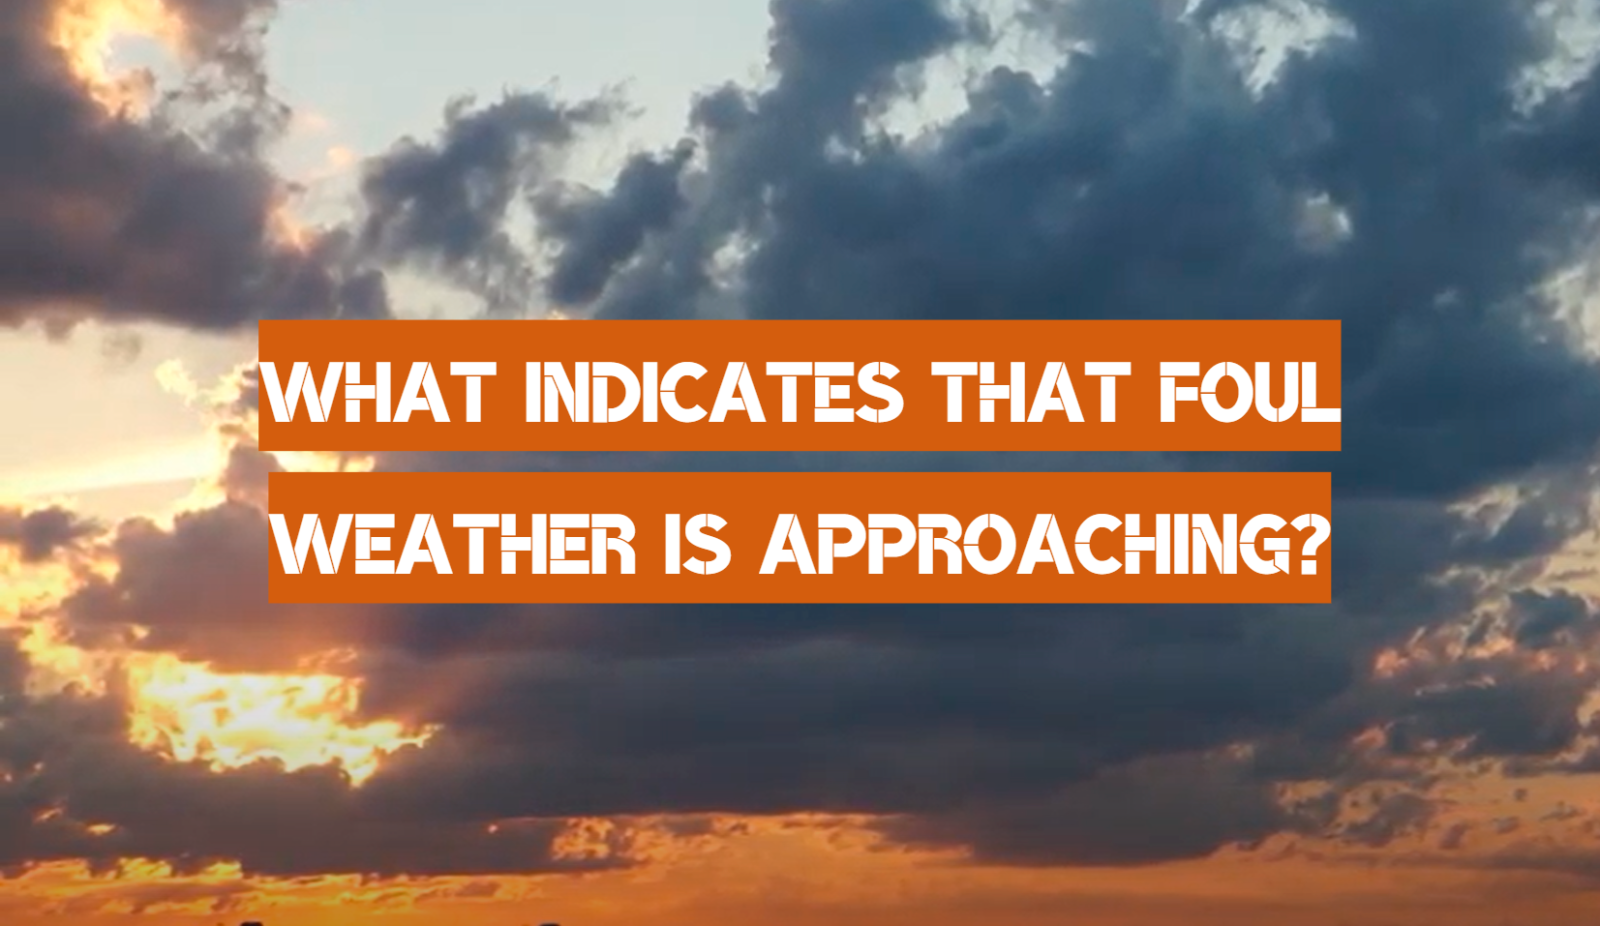 What Indicates That Foul Weather Is Approaching?